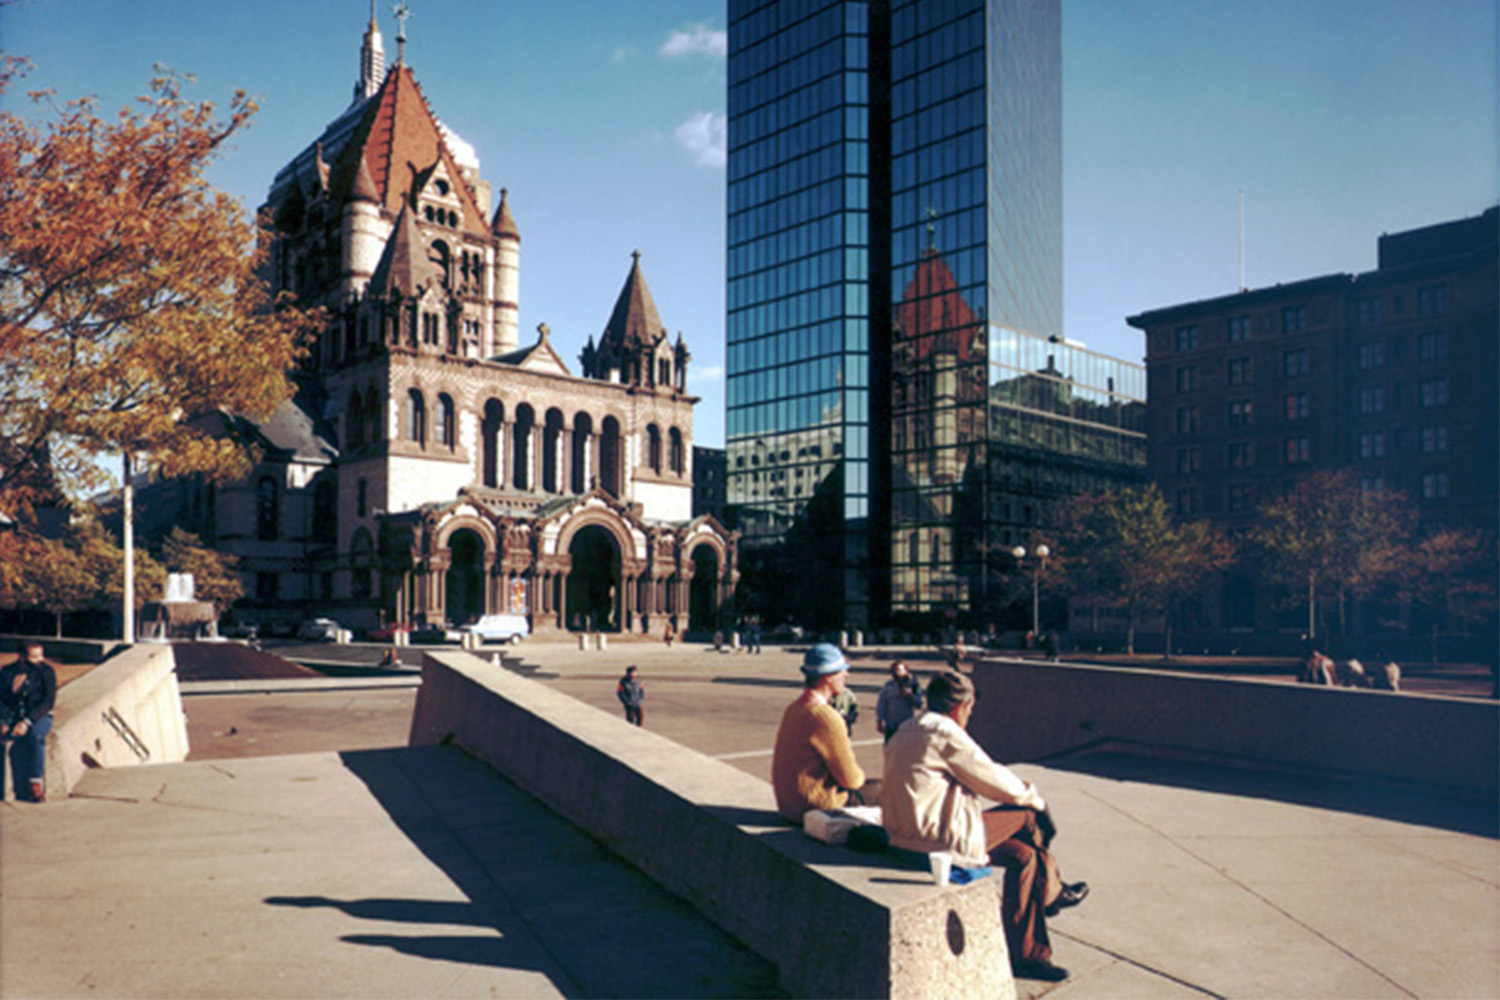 View of the Trinity Church in Boston, with two elderly people sitting on a bench